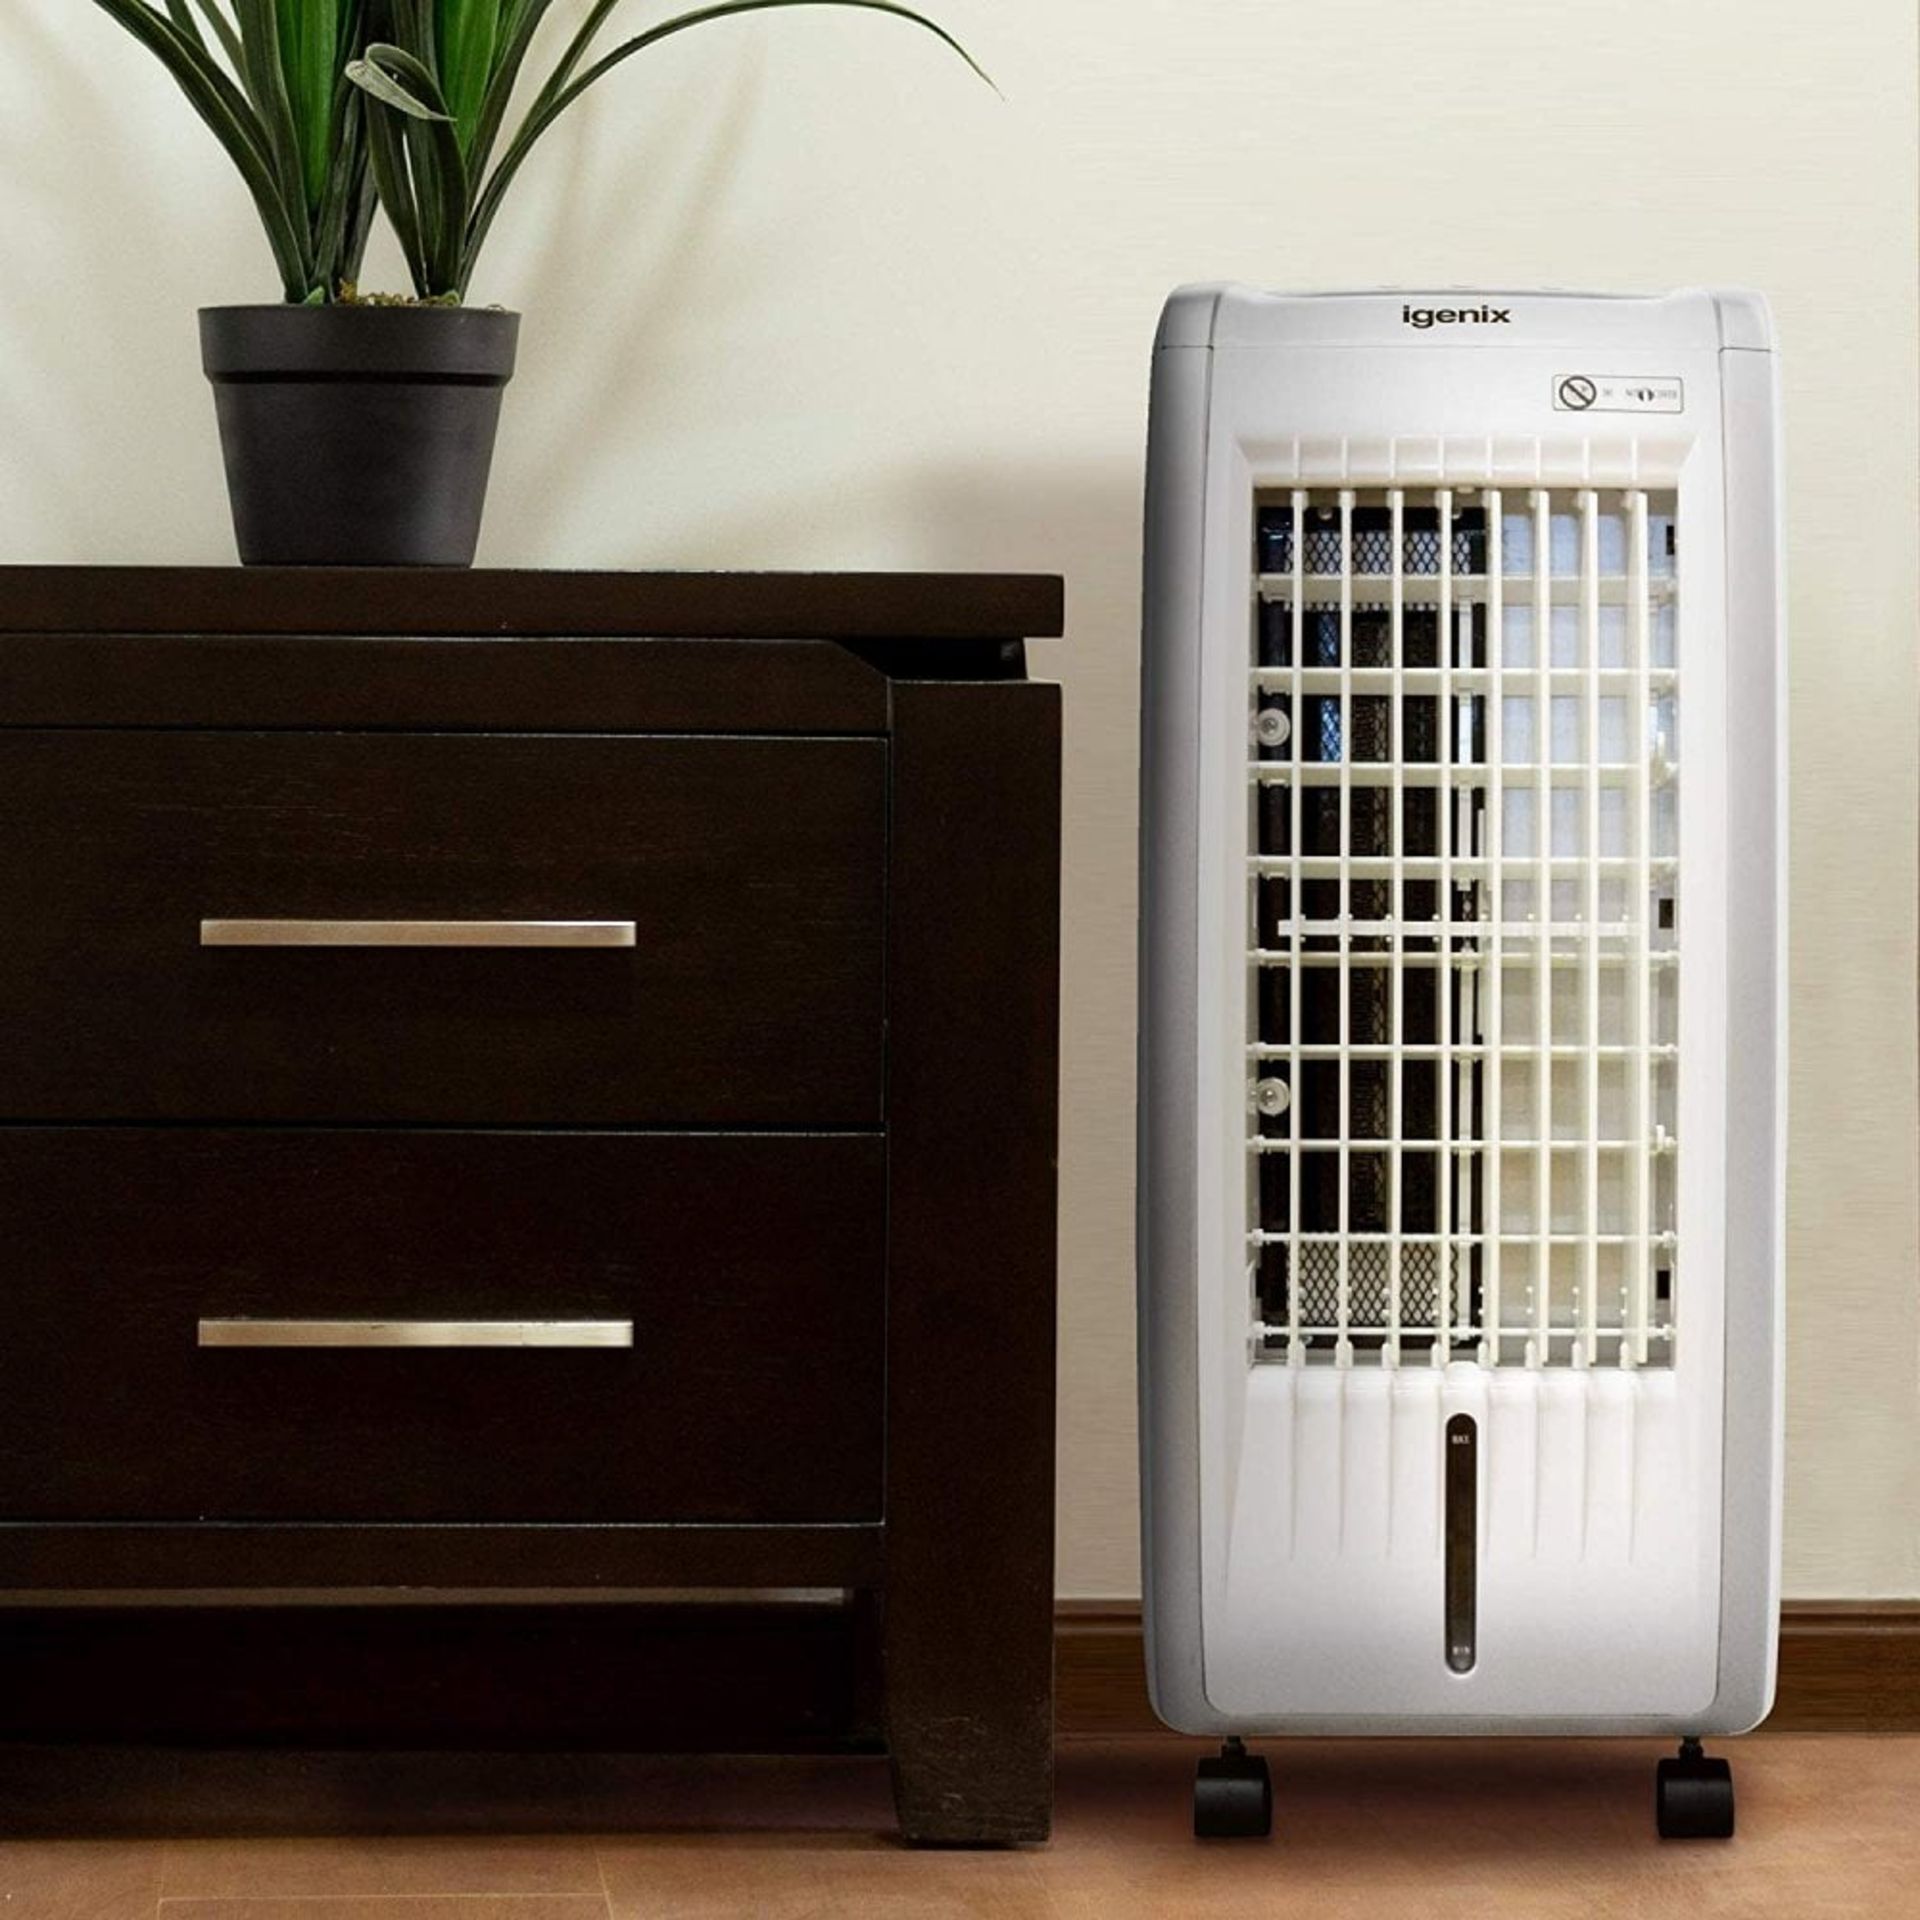 1 x Igenix IG9704 Portable 4-in-1 Evaporative Air Cooler with Fan Heater, Humidifier and Air - Image 5 of 7